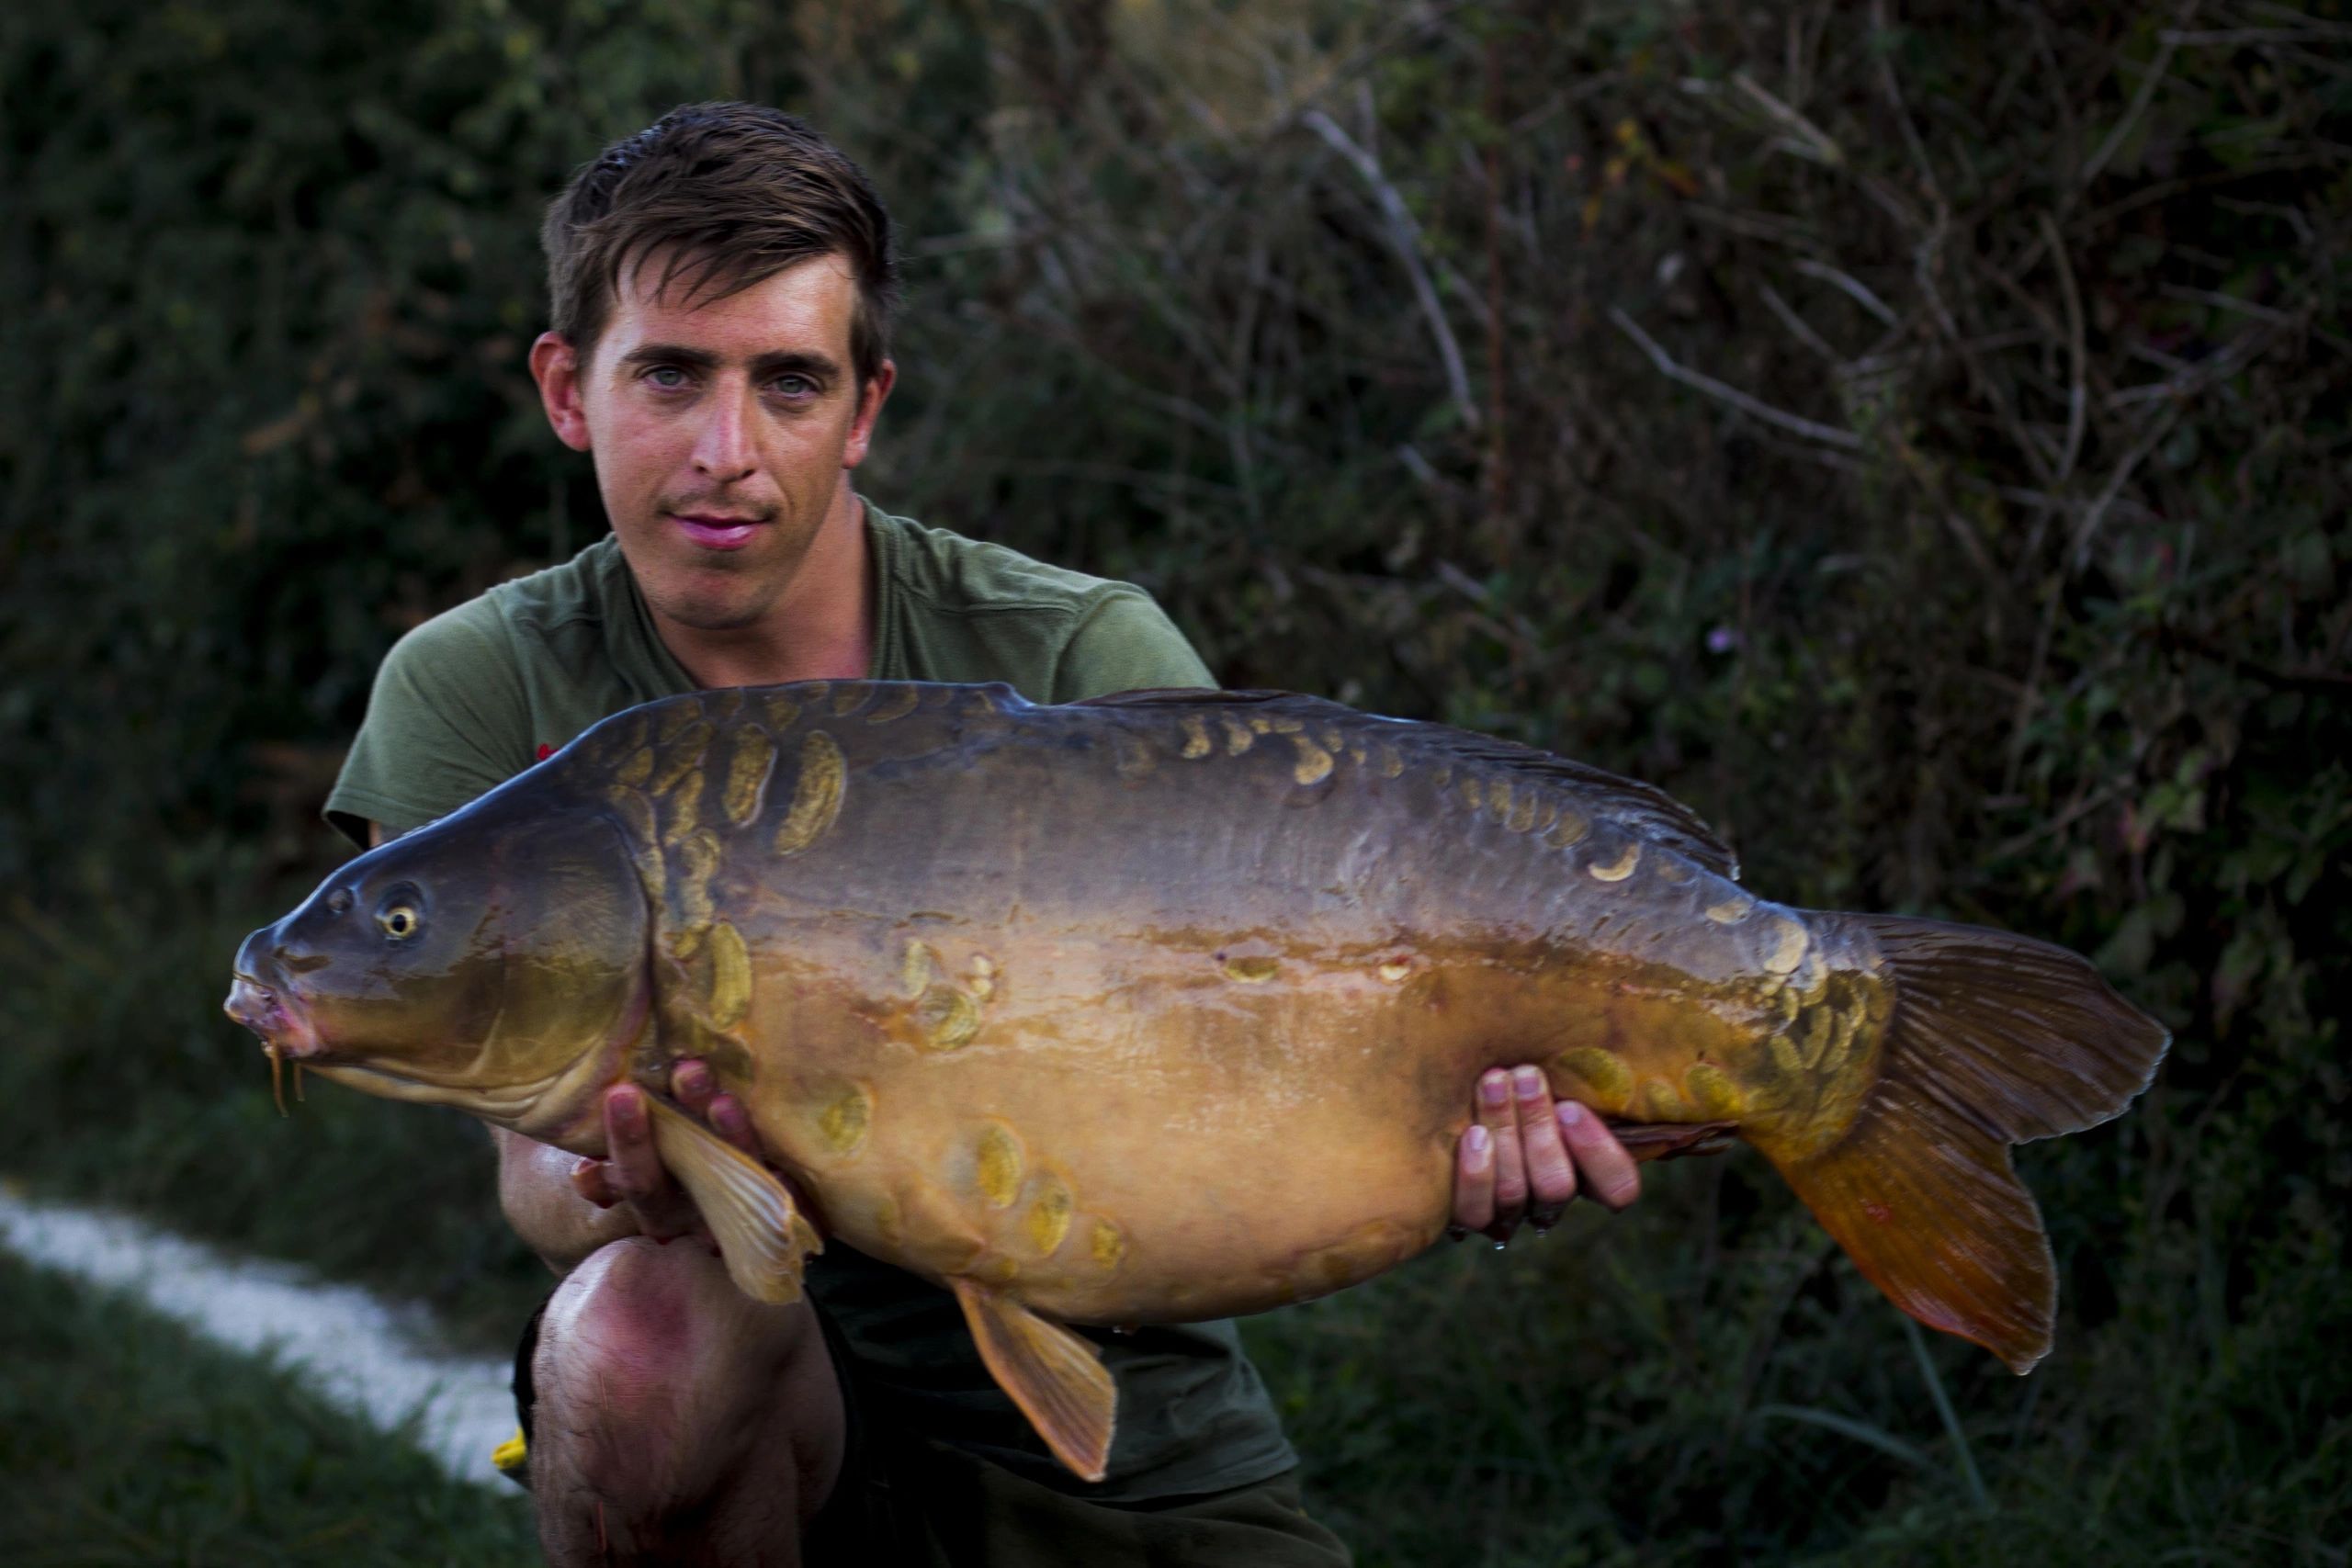 Co-founder George Treadwell with a Gigantica 39lb Mirror carp